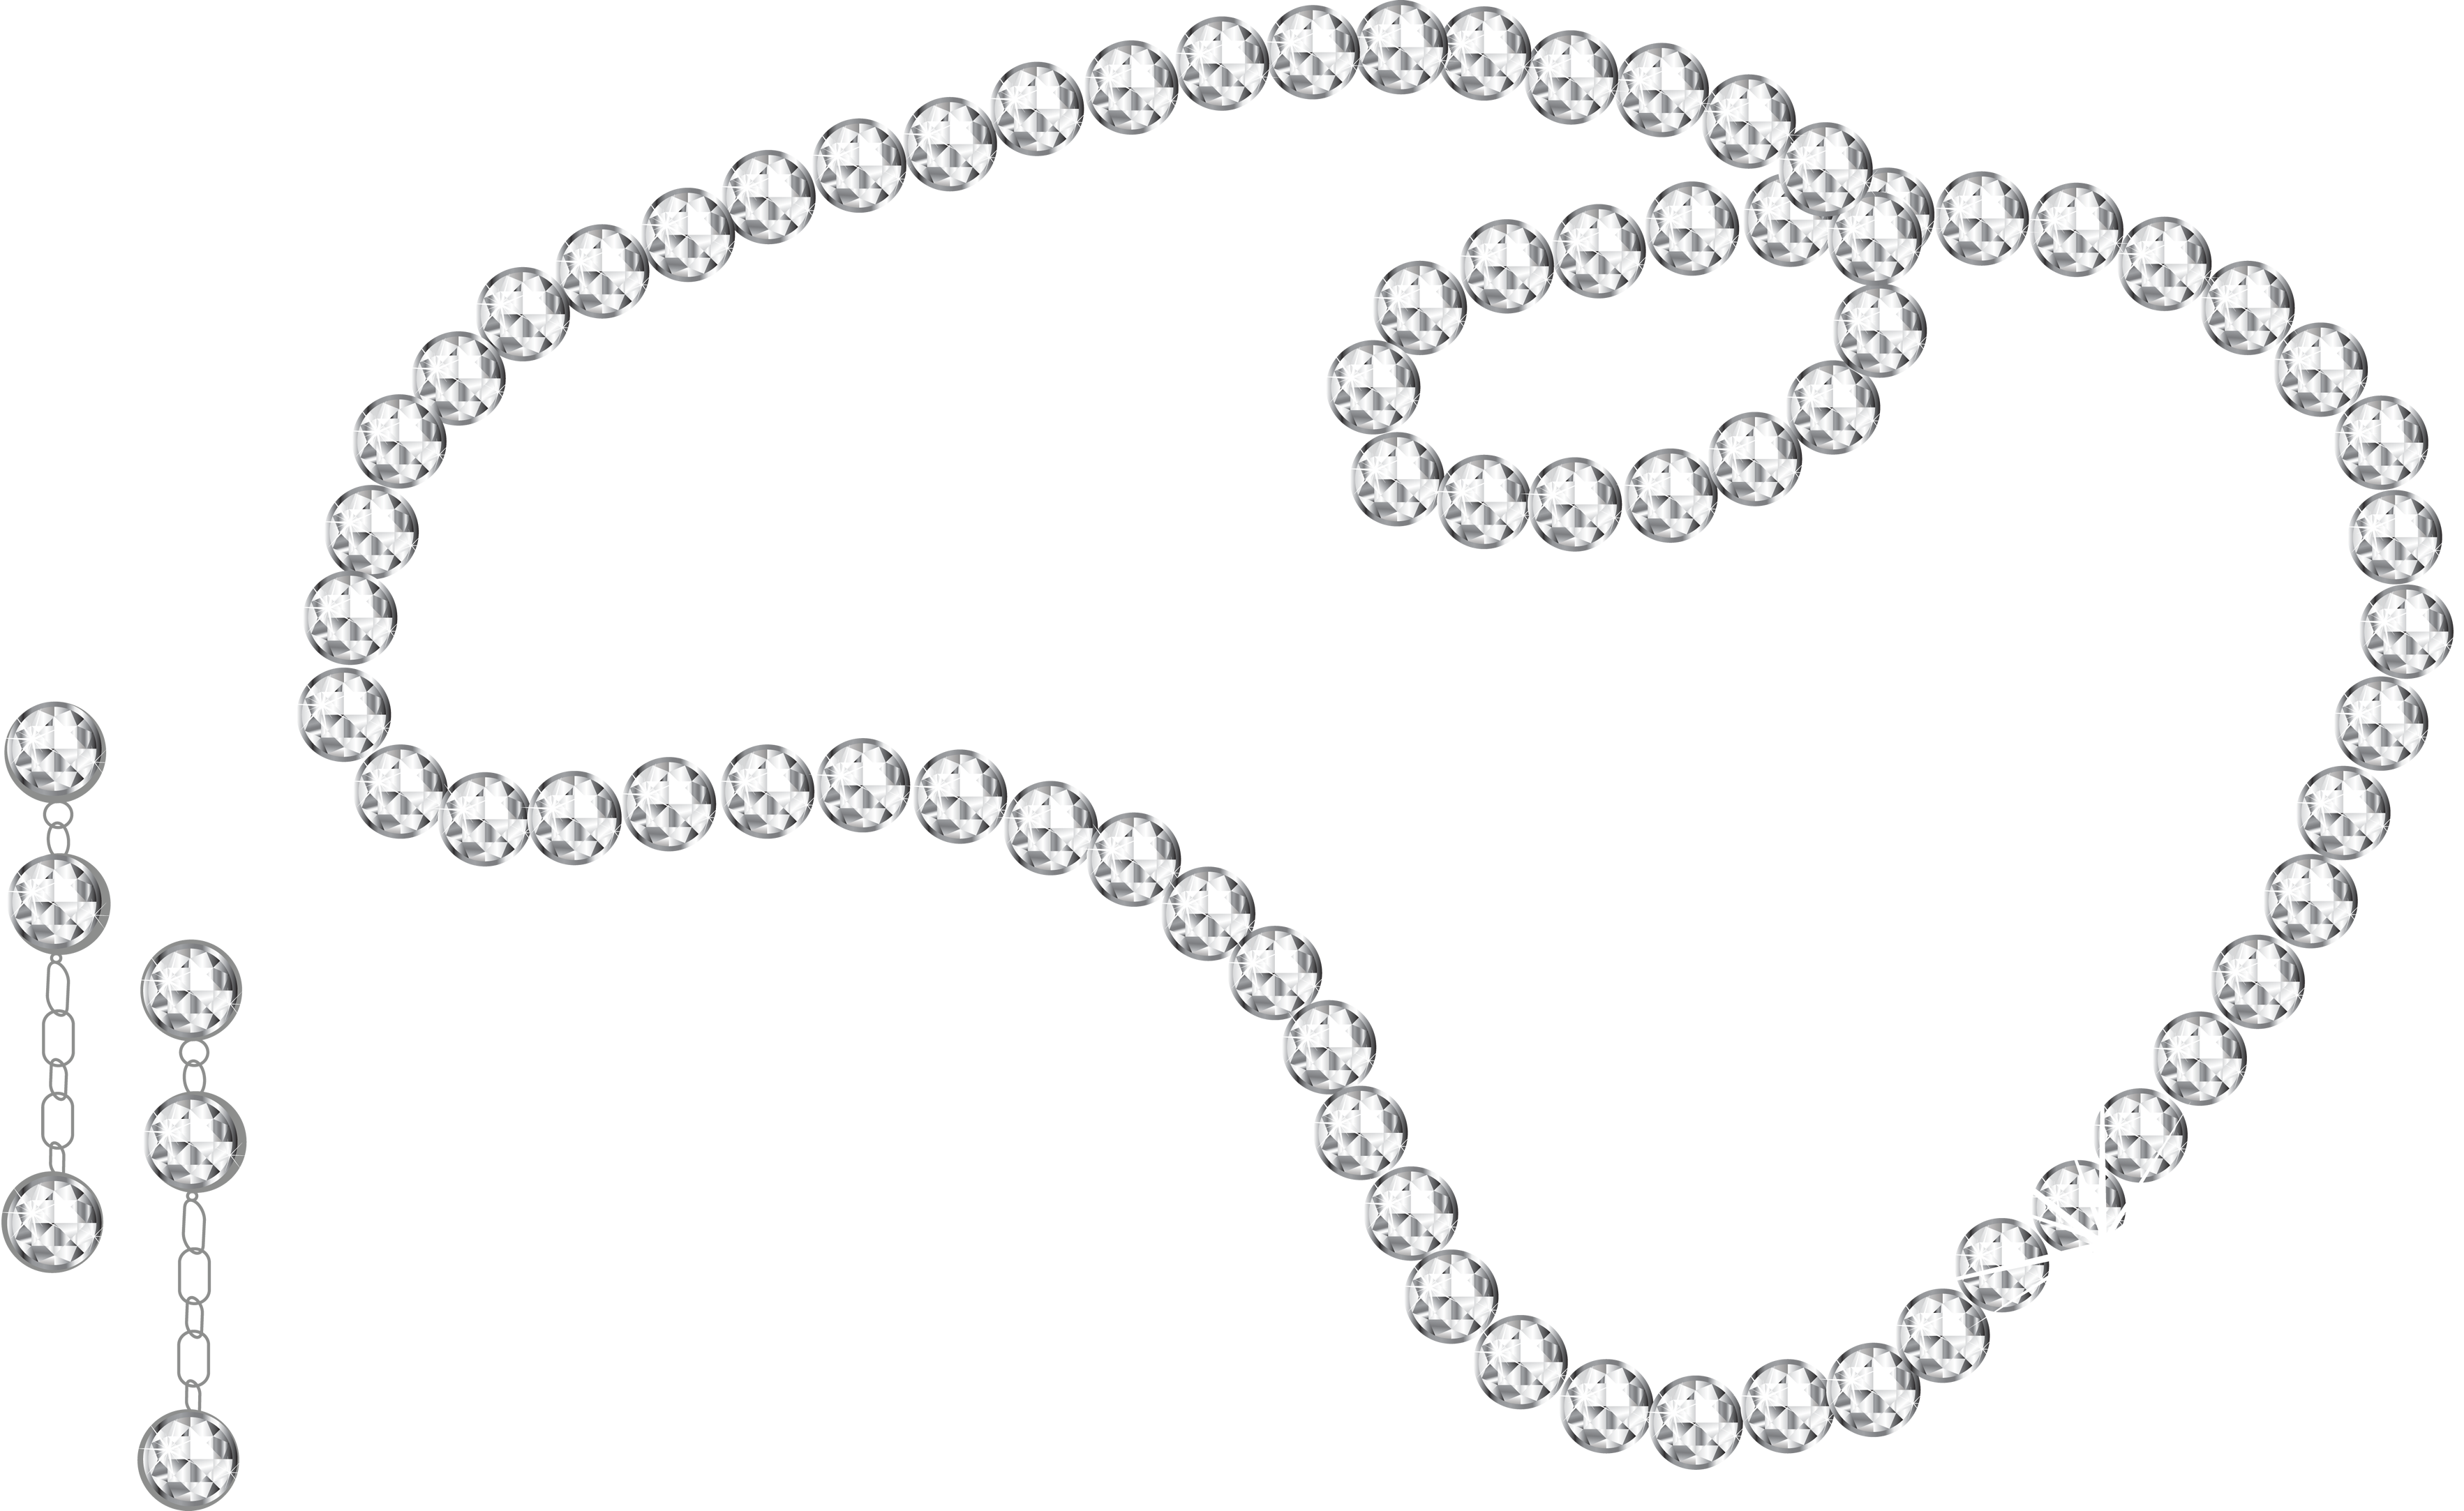 Diamond Necklace And Earrings PNG Image